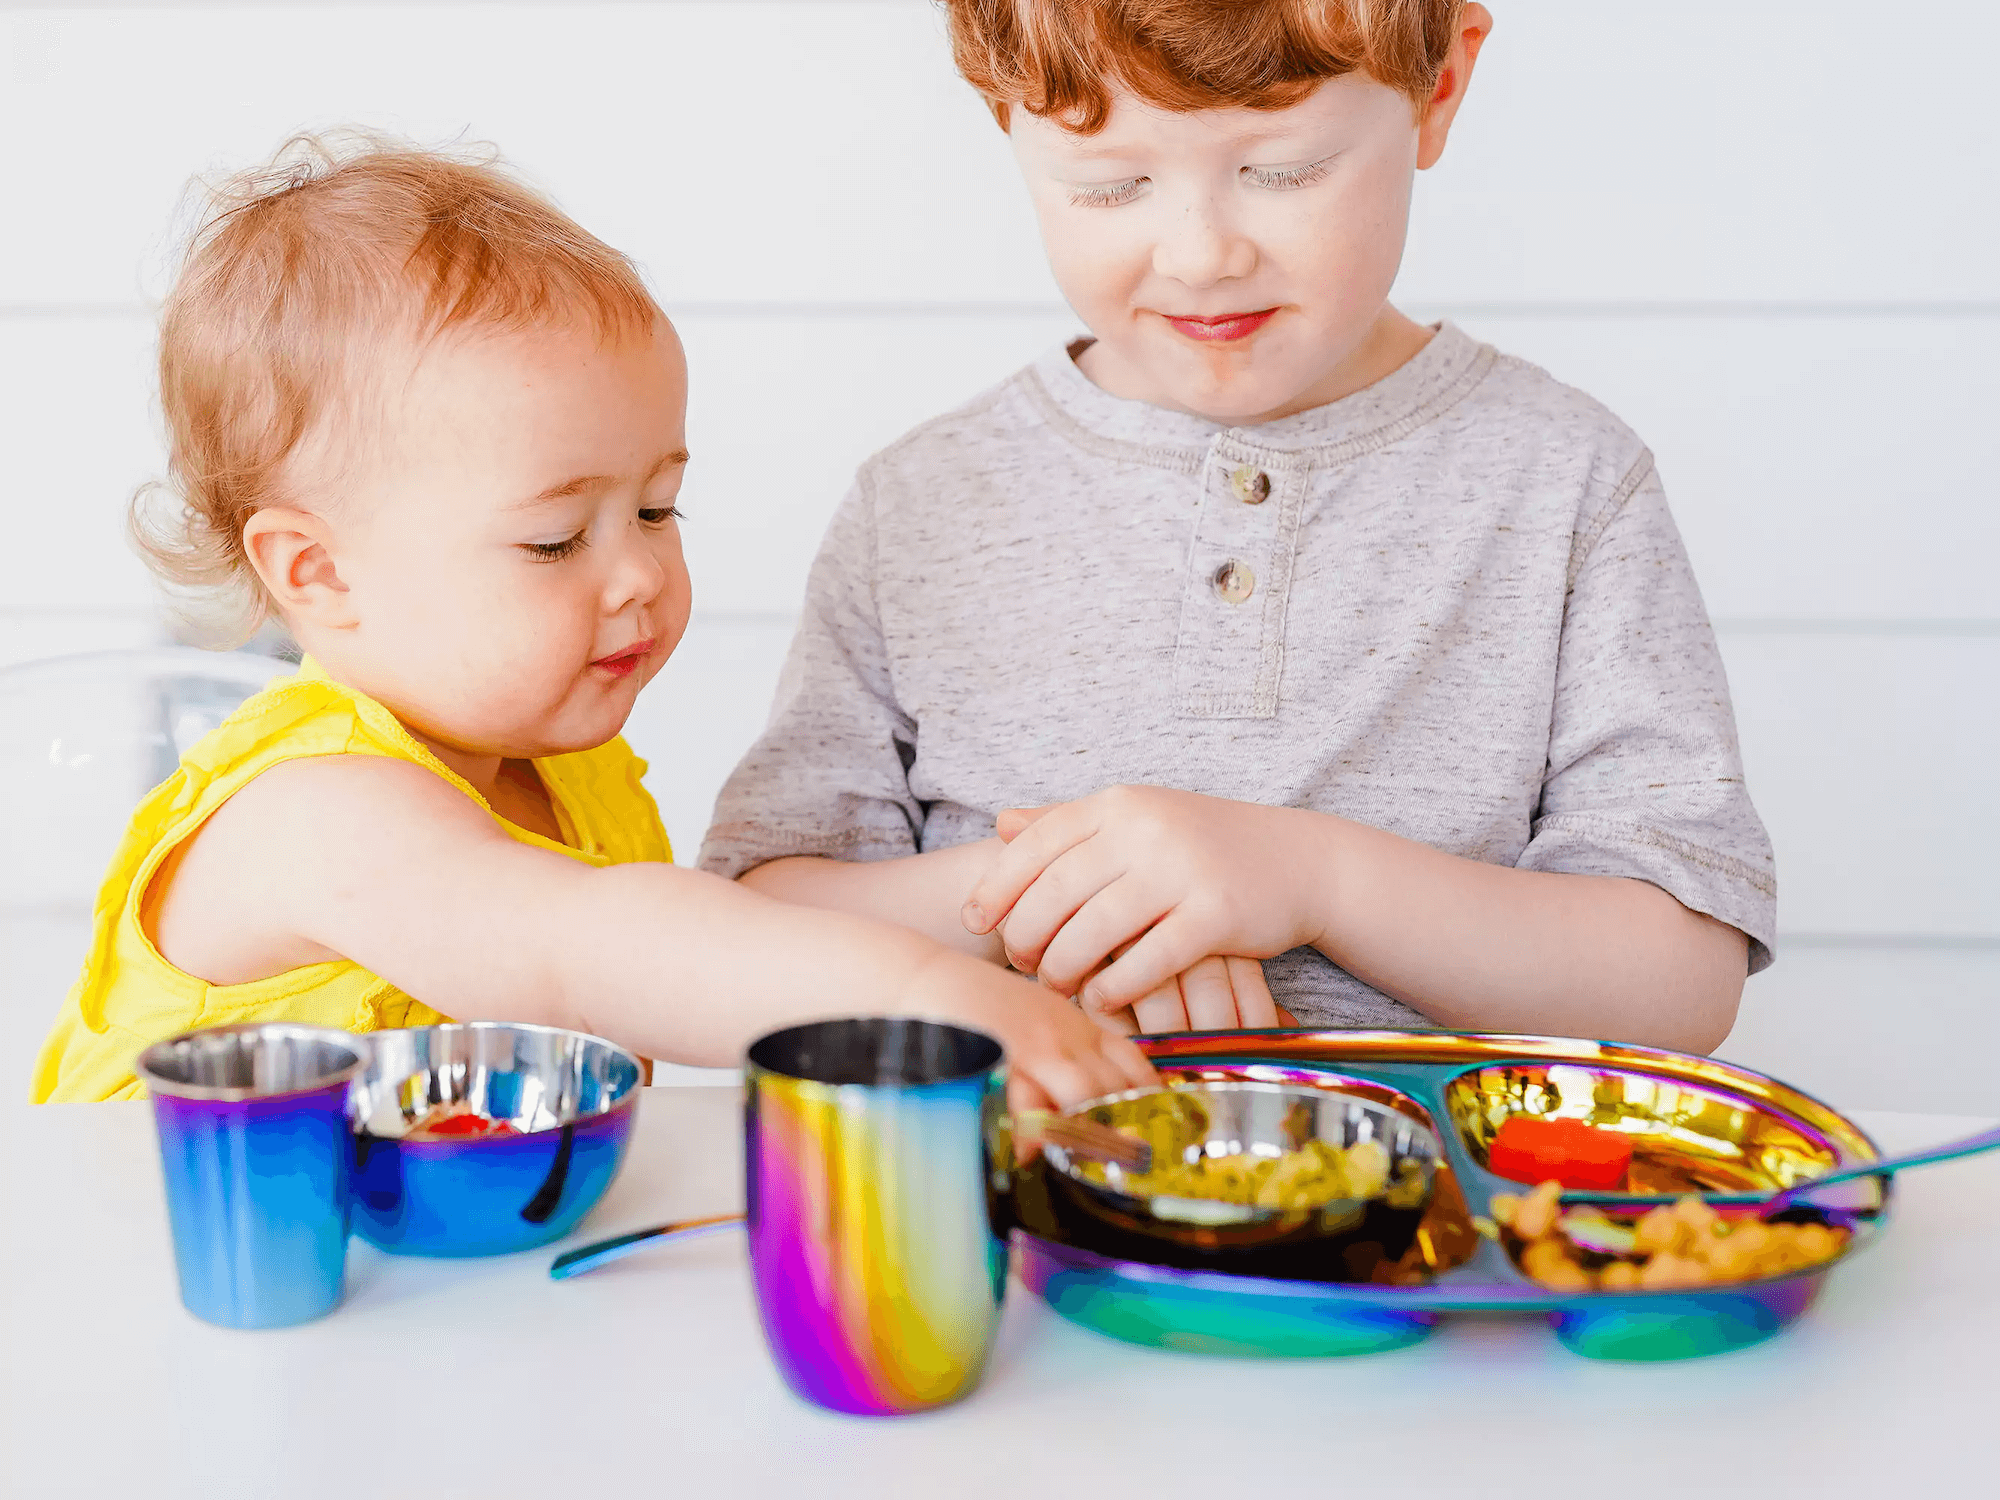 kids eating with stainless steel dishes